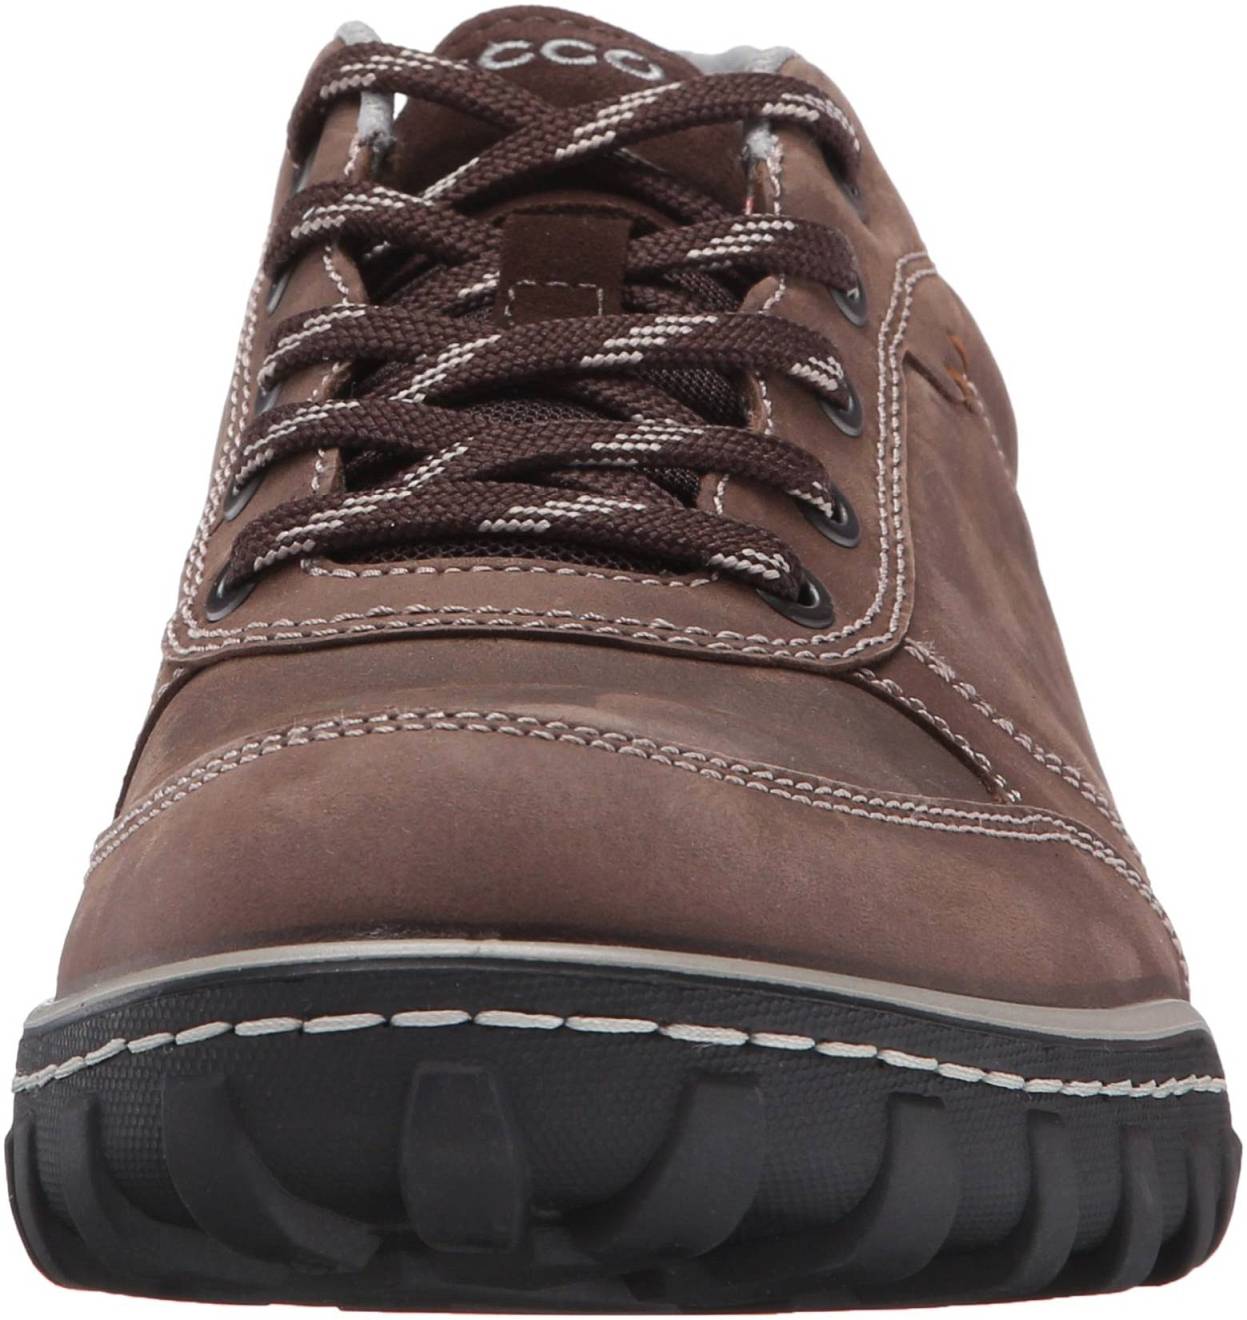 Ecco Urban Lifestyle Low – Shoes Reviews & Reasons To Buy